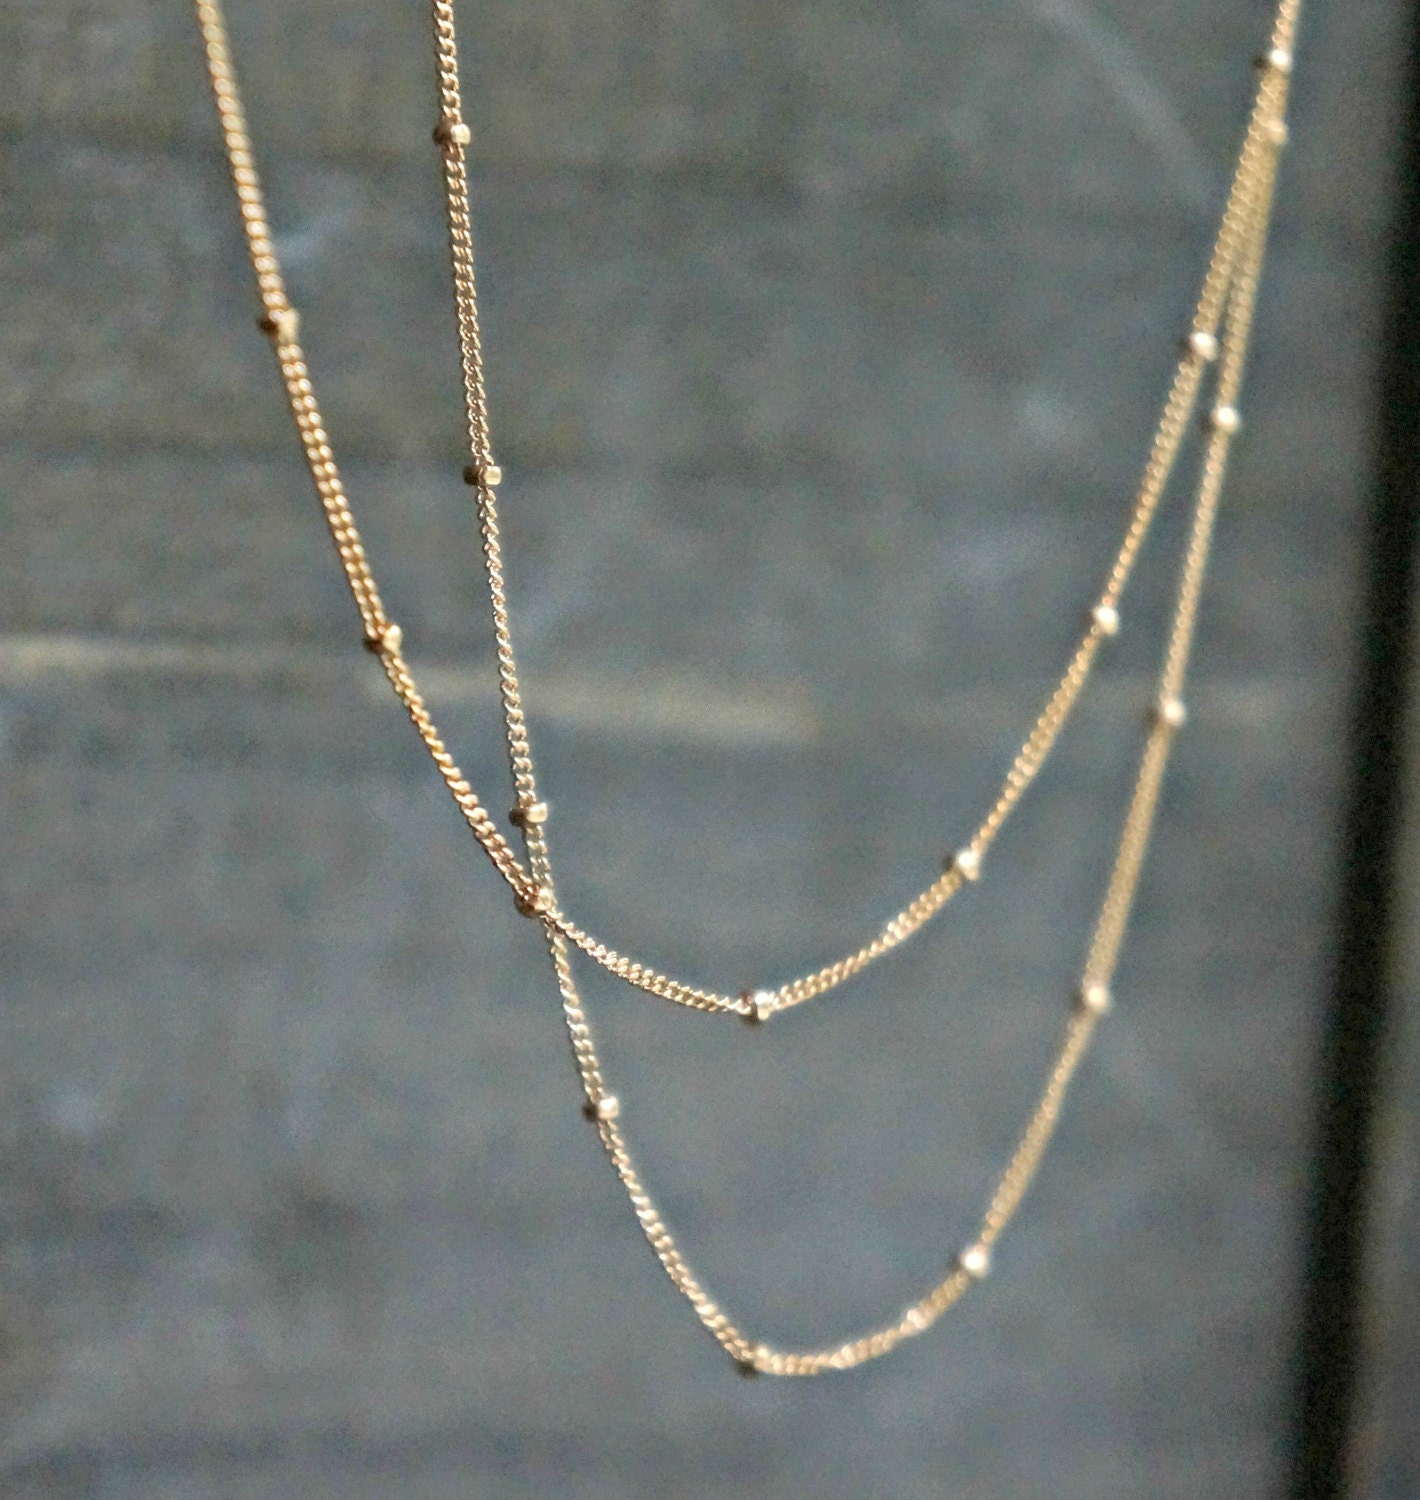 Satellite Chain Necklace // 14k Gold Filled Dainty Beaded